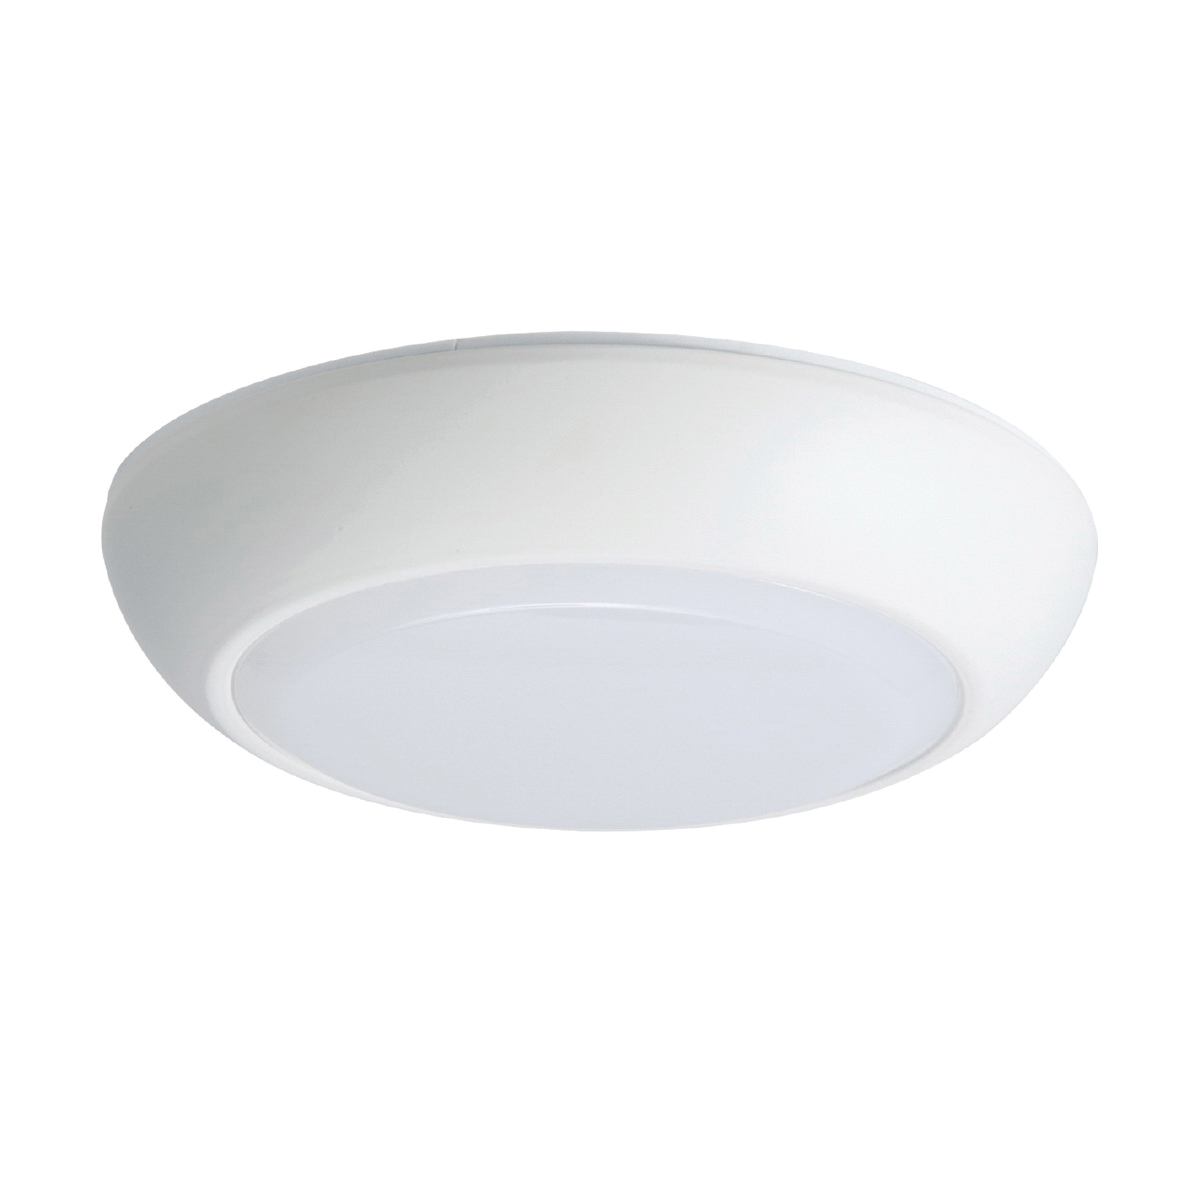 HALO CLD Series CLD7089SWHR Surface Mount Light Fixture, 0.93 A, 120 V, 11.2 W, LED Lamp, 800 Lumens